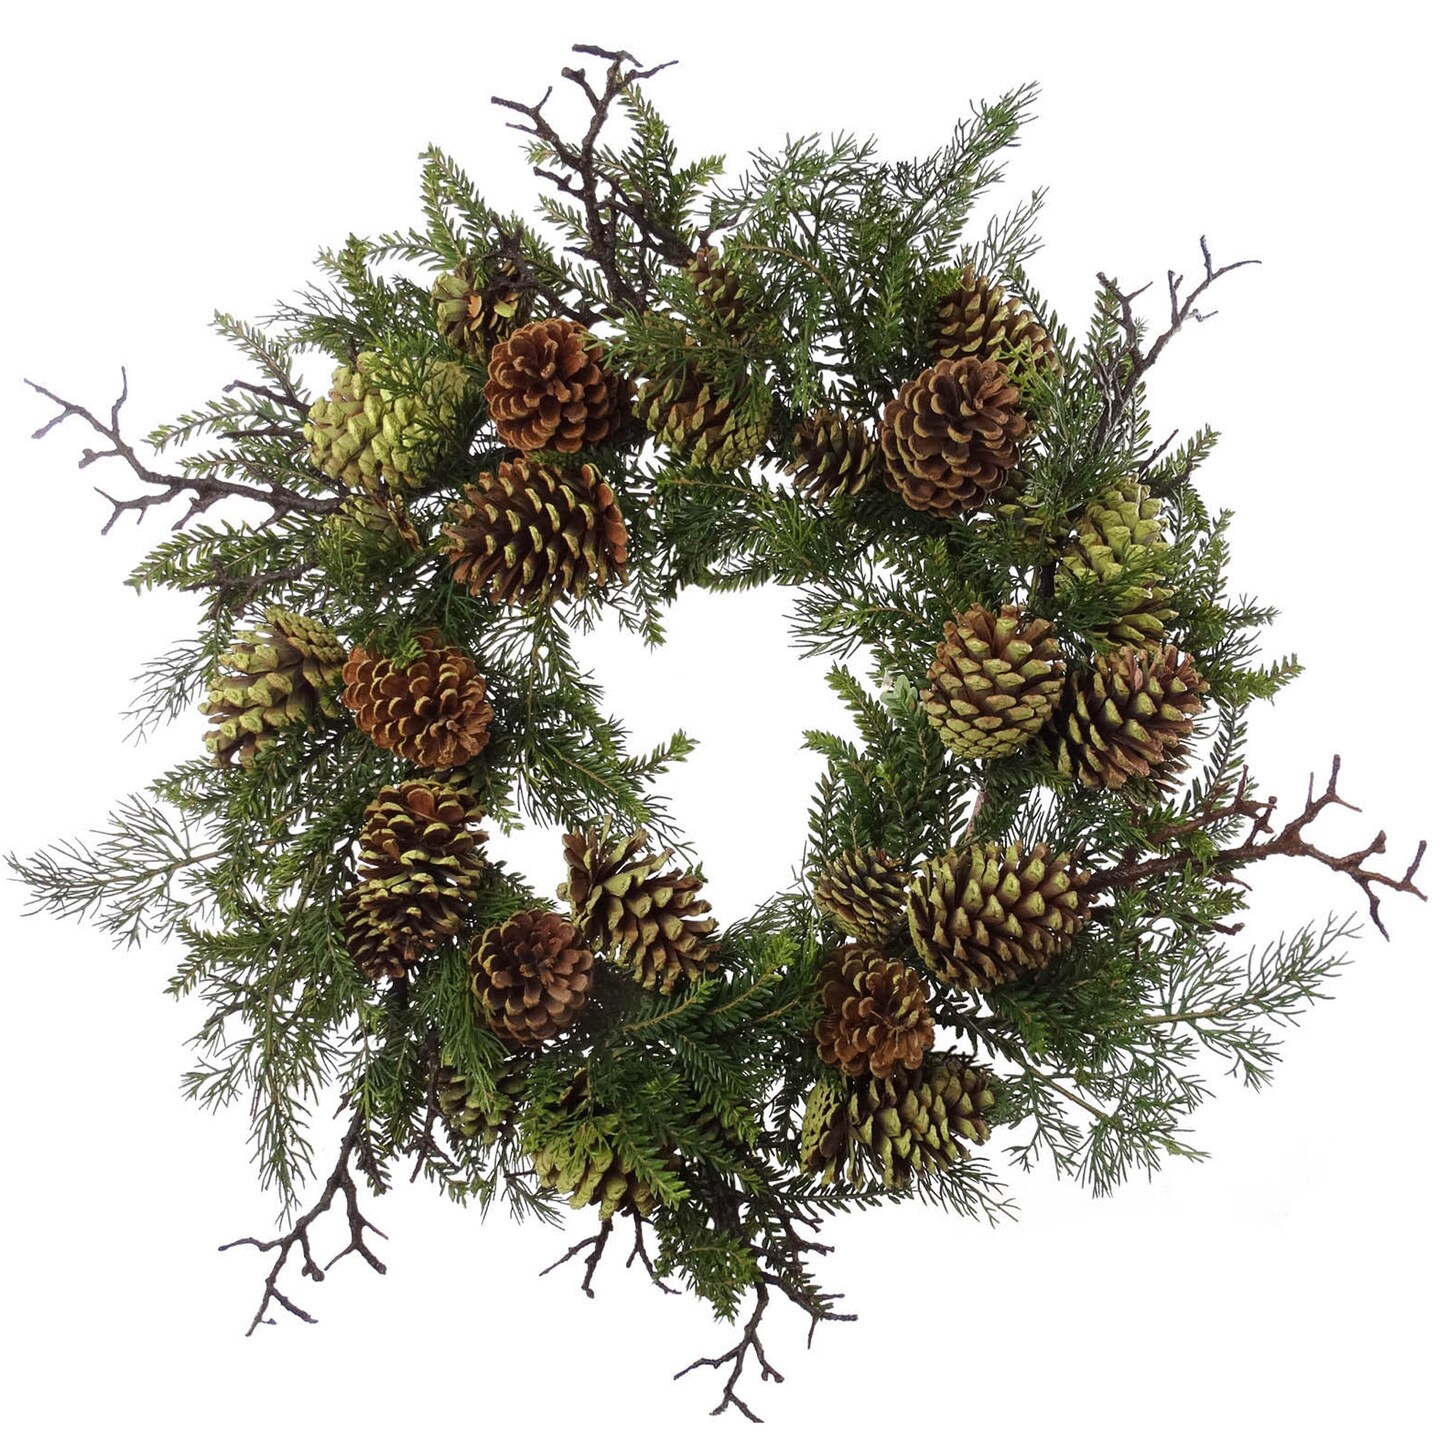 Set of 2: Artificial Mixed Pine Wreath with Natural Moss, Twigs, &#x26; Pine Cones | 24&#x22; Wide | Holiday Accents | Indoor/Outdoor Use | Winter | Home &#x26; Office Decor